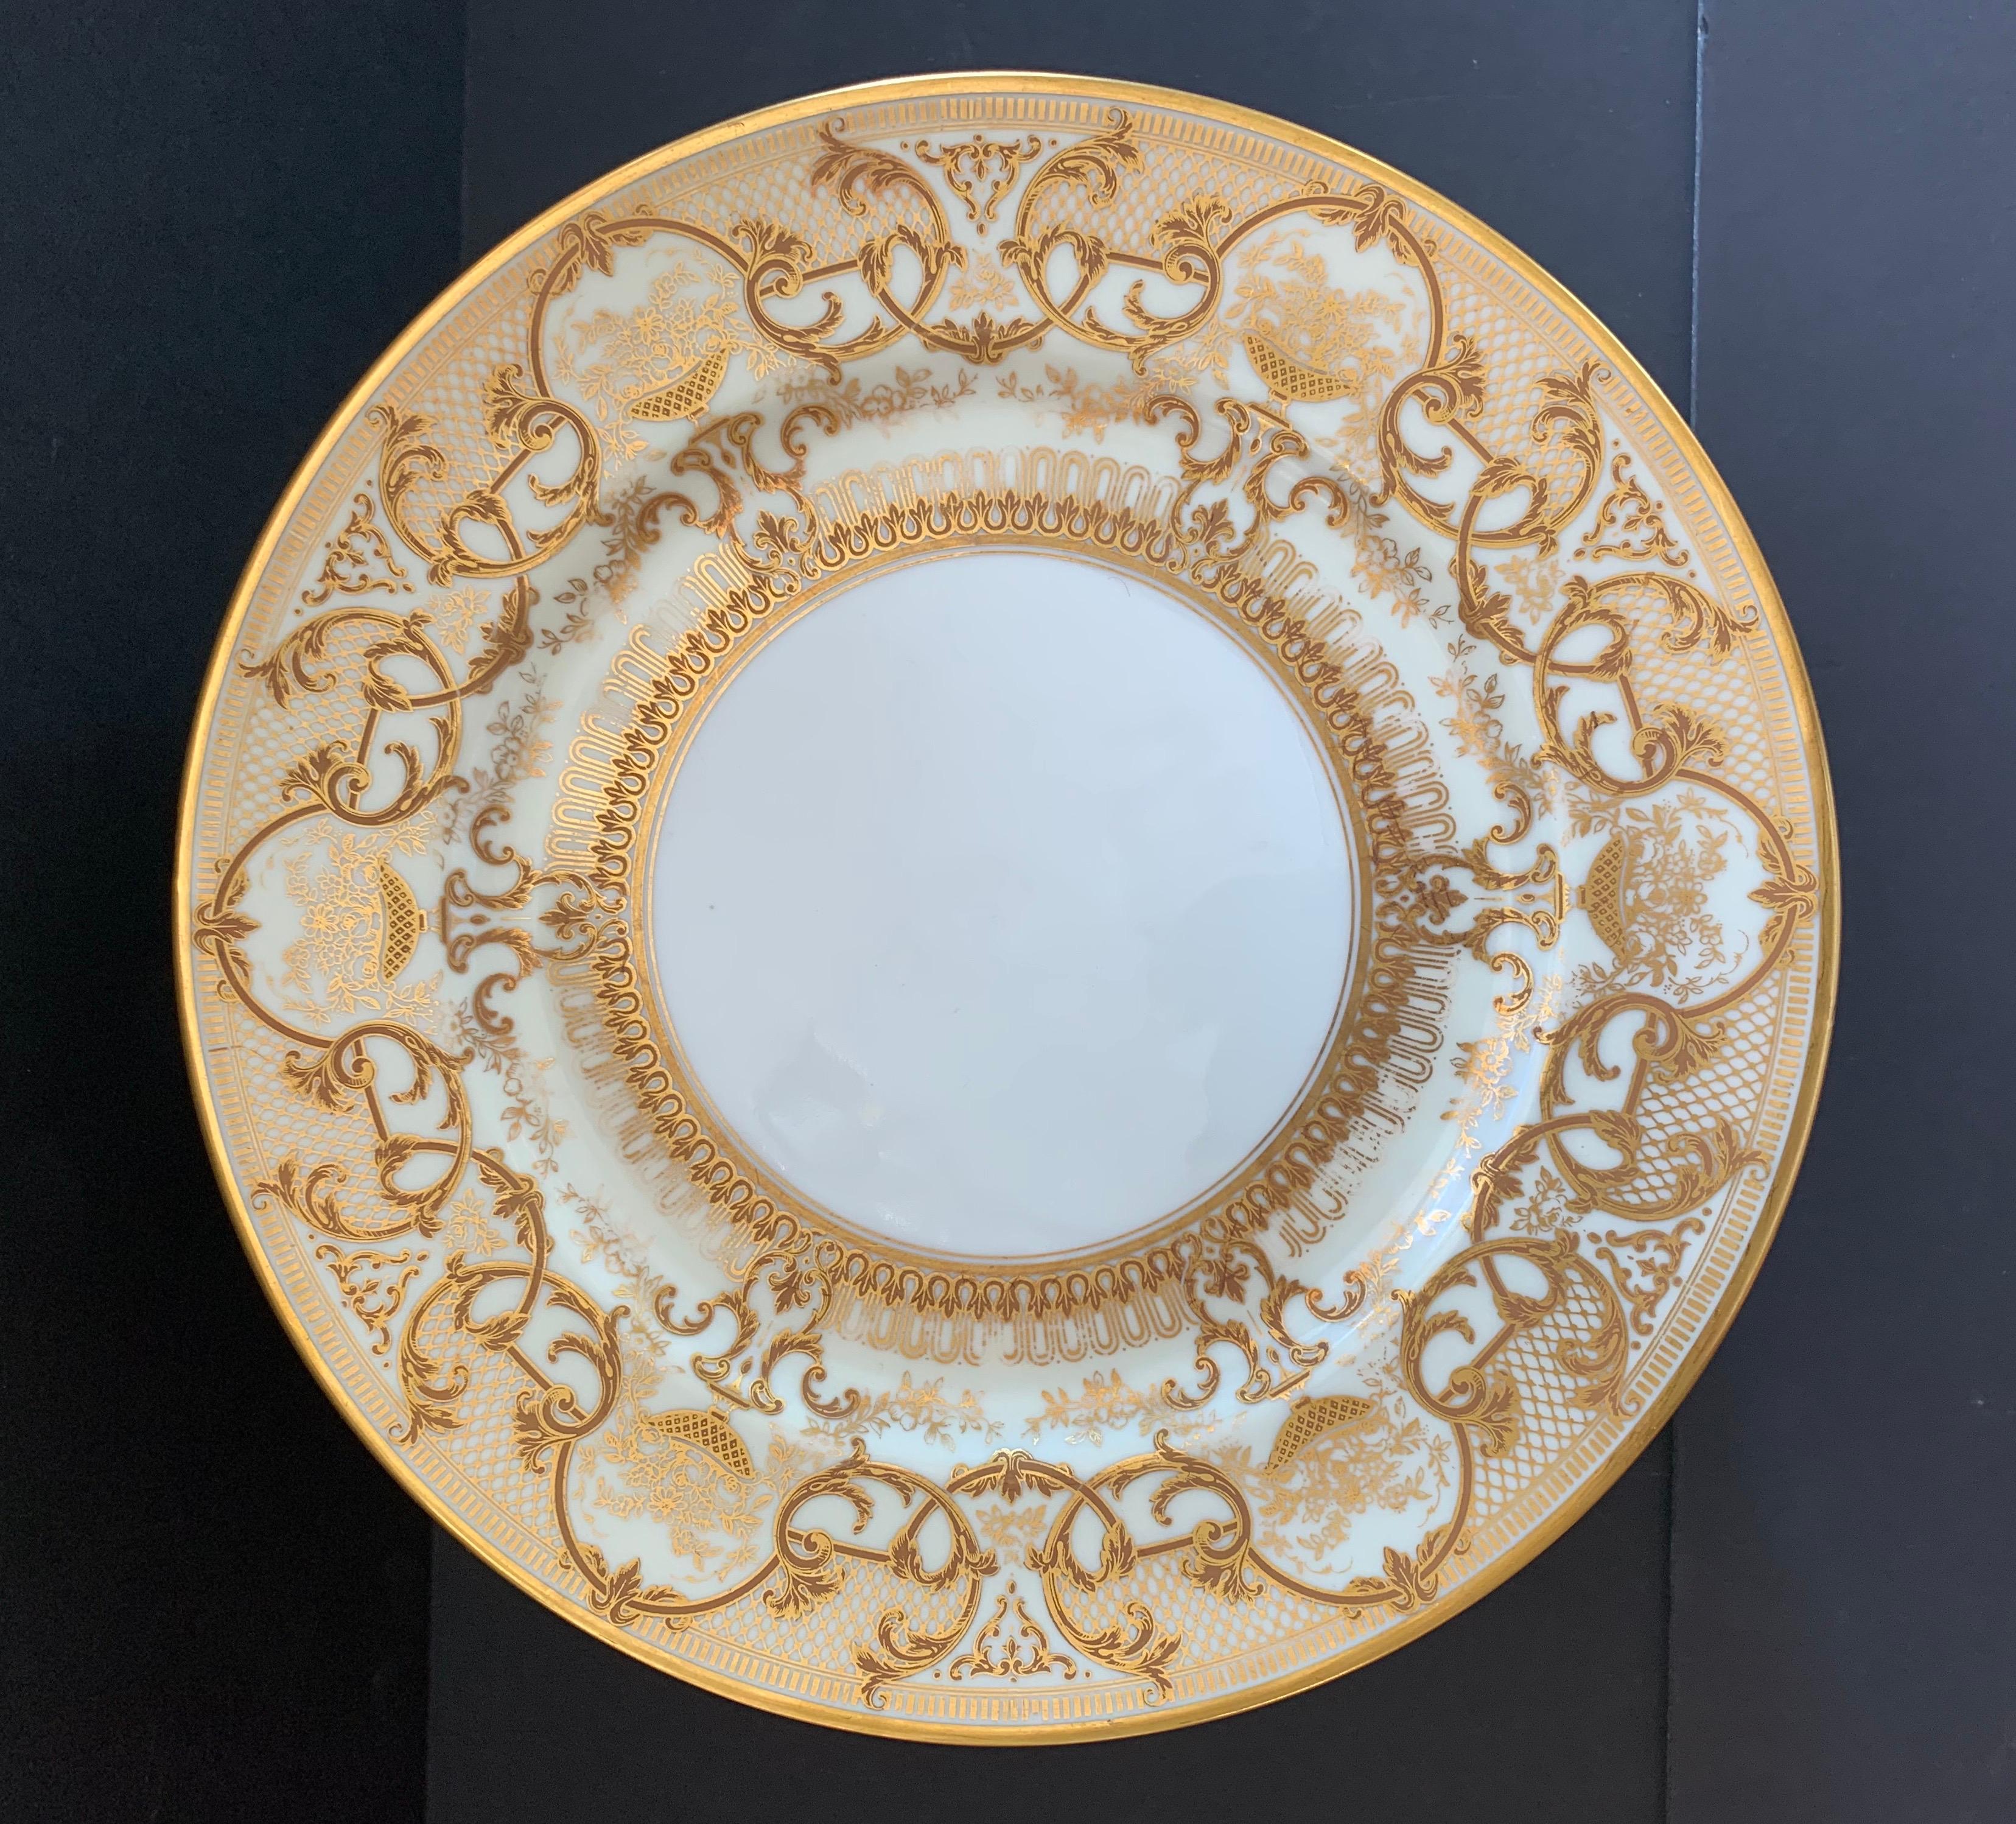 A wonderful service of plates set of 12 Limoges France white with gold flower bouquet design dishes.